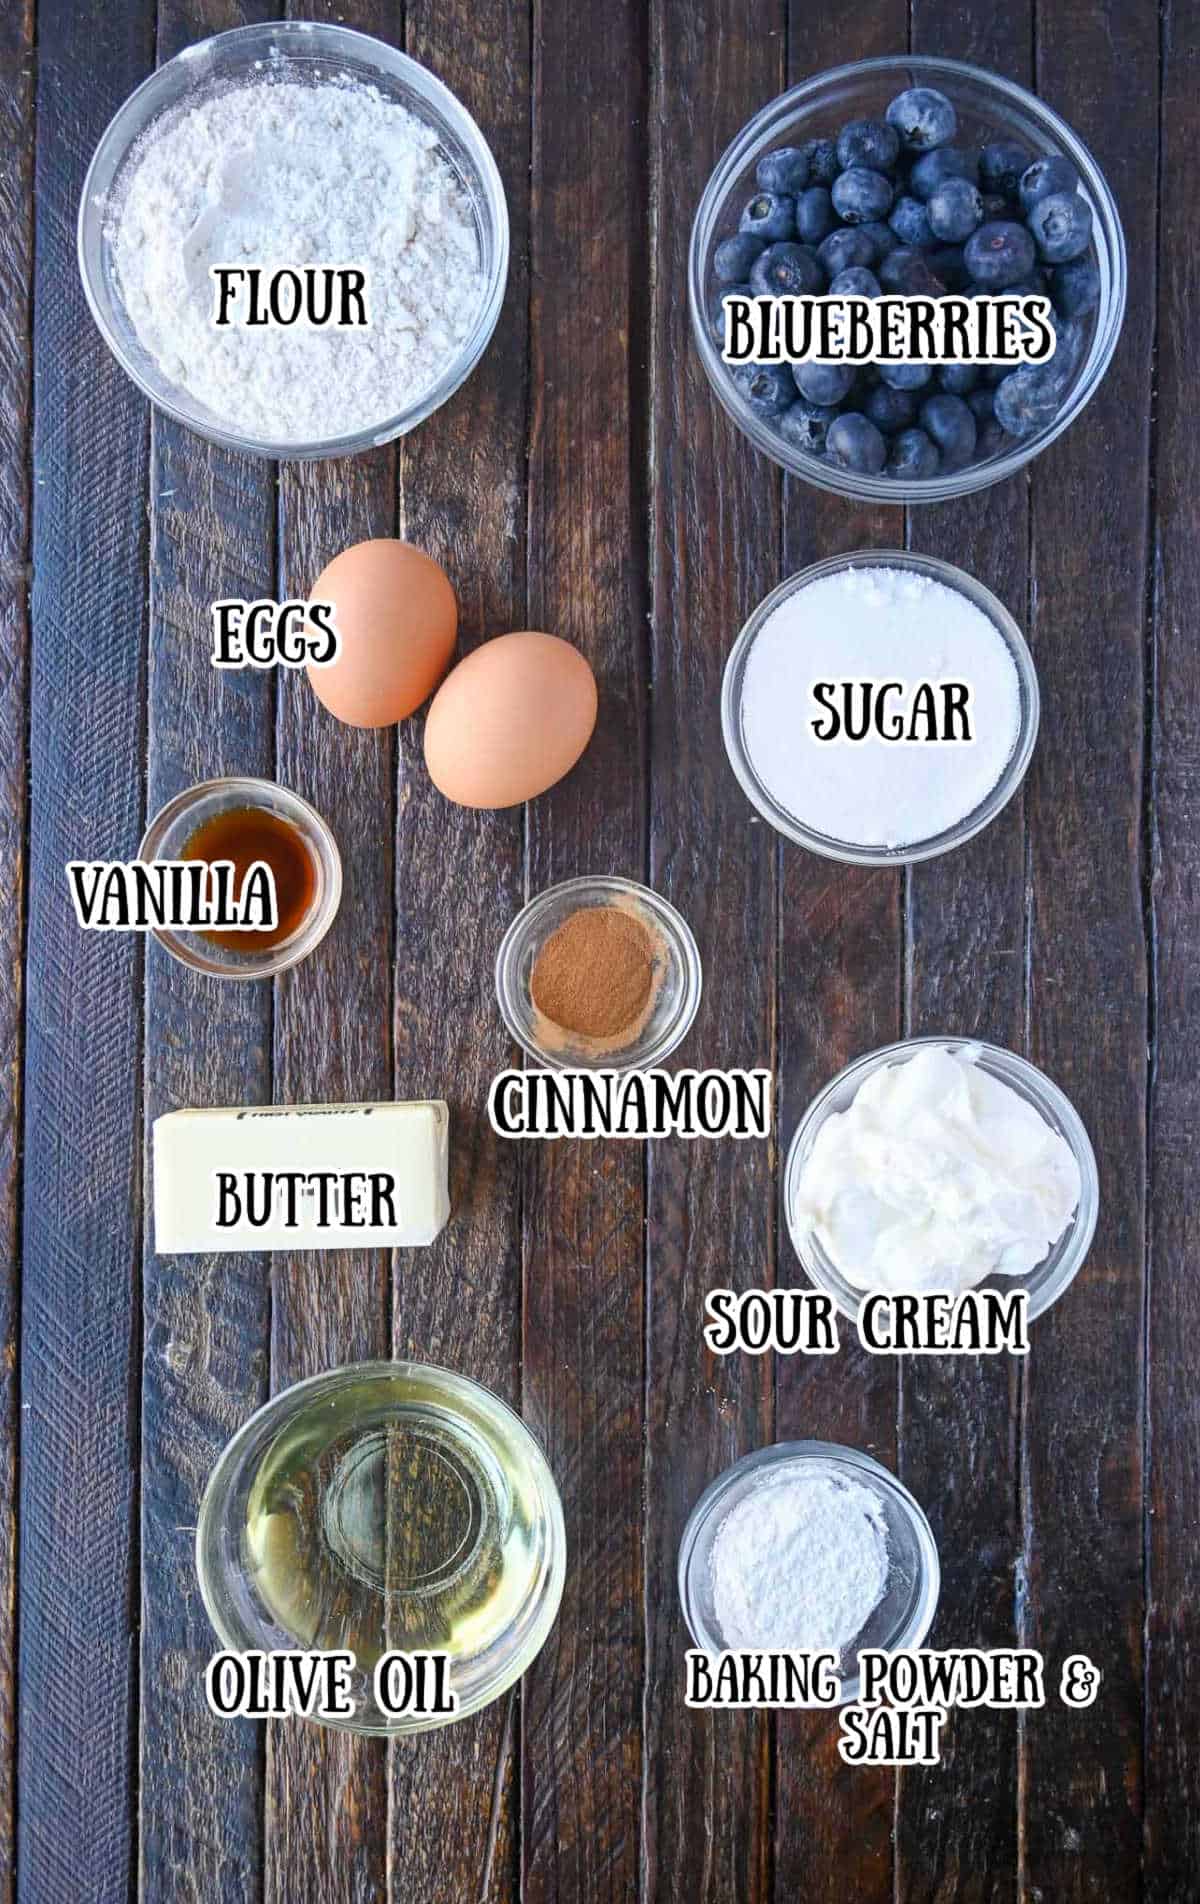 All the ingredients needed for these muffins.